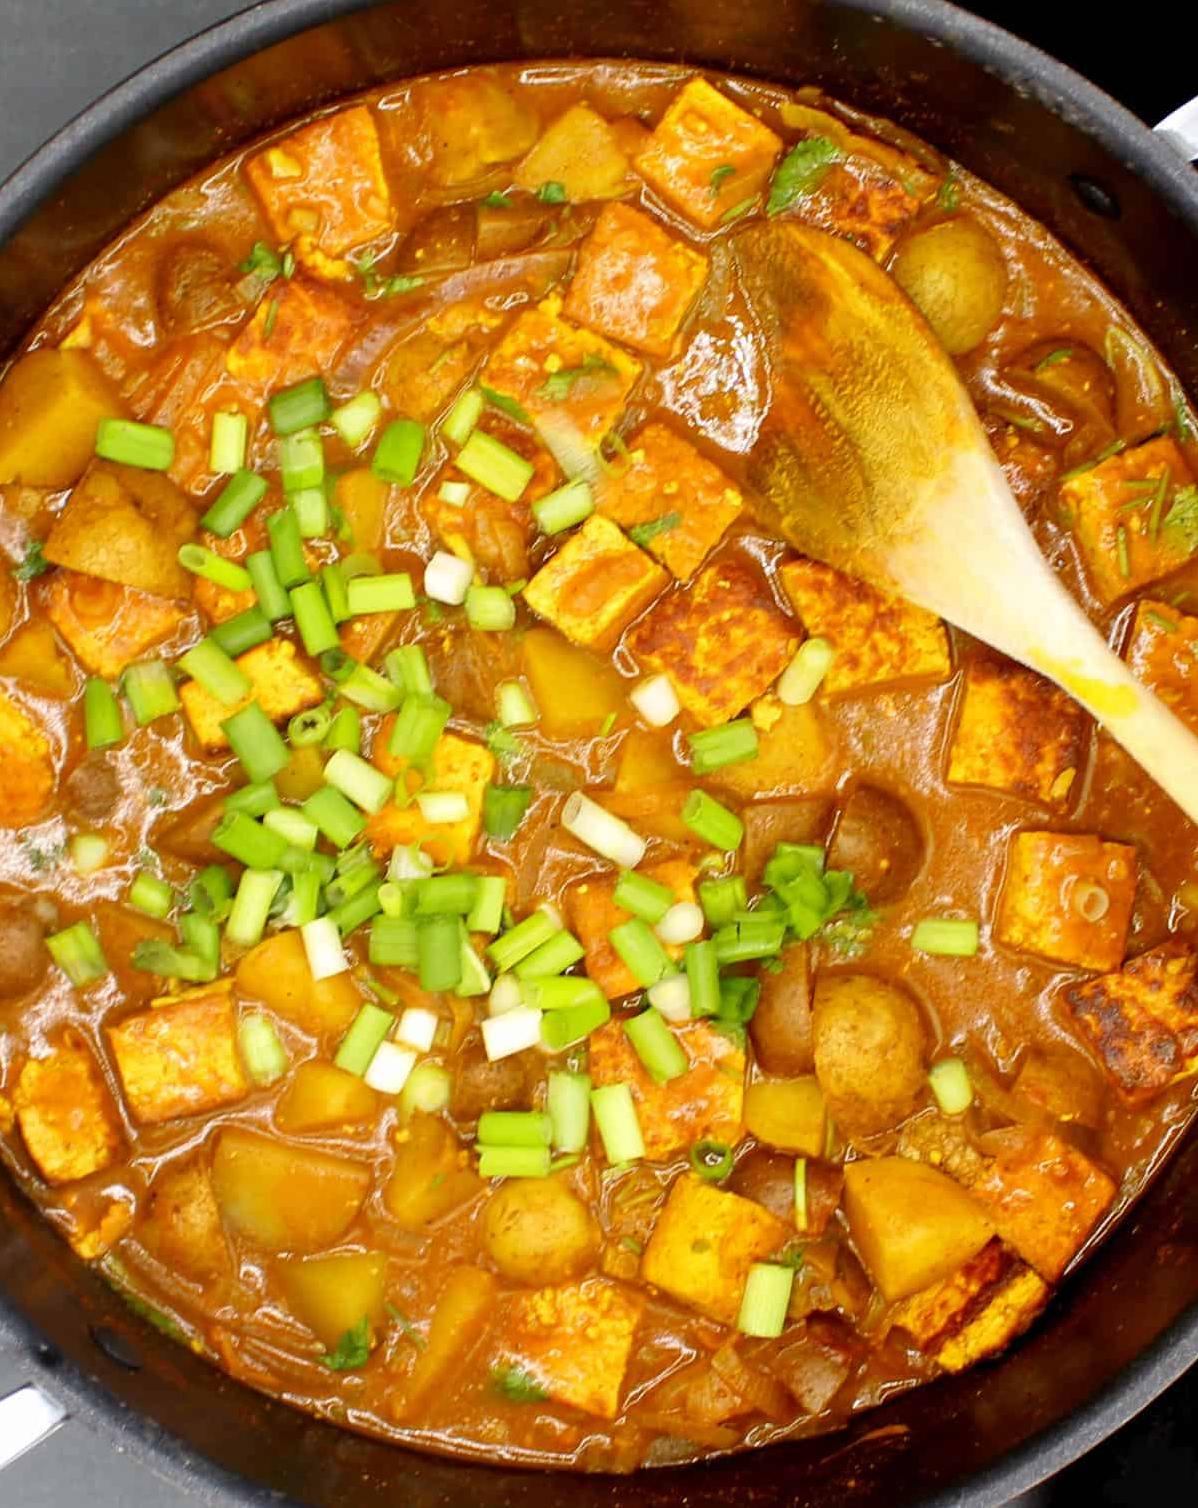  Get your daily dose of veggies in a delicious way with this hearty vegetarian curry